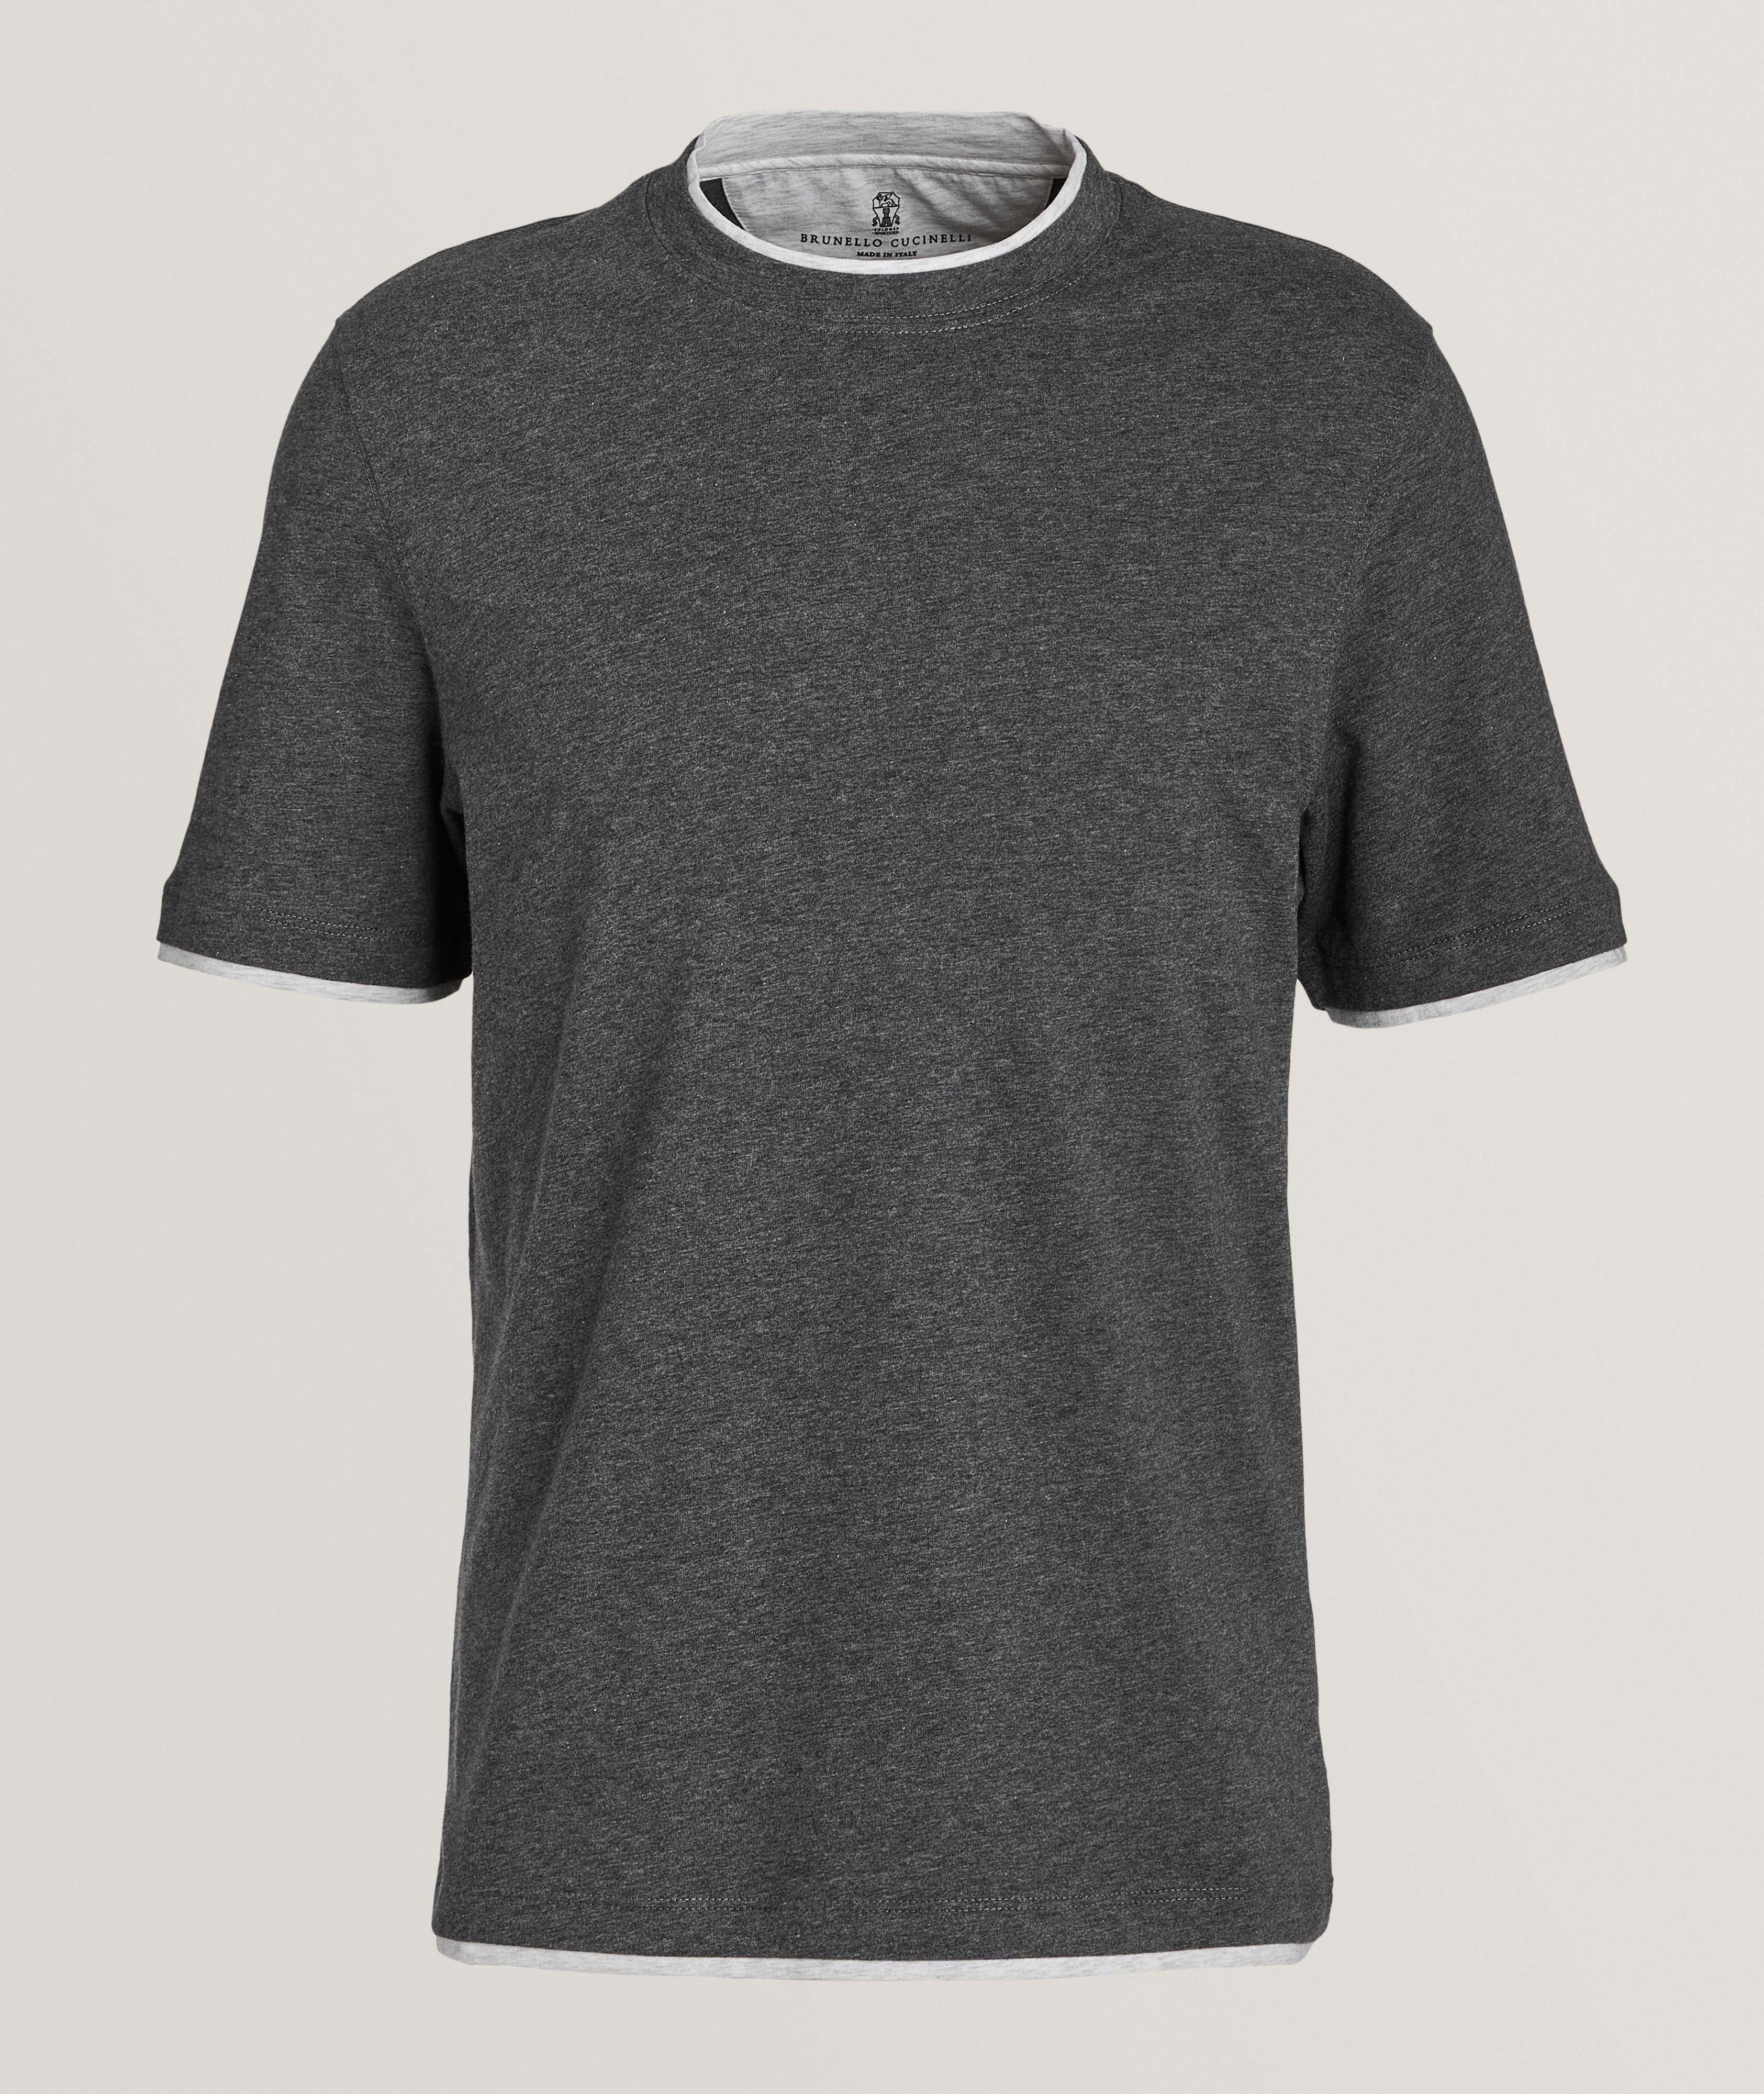 Double Layer Contrast Tipped Cotton T-Shirt image 0